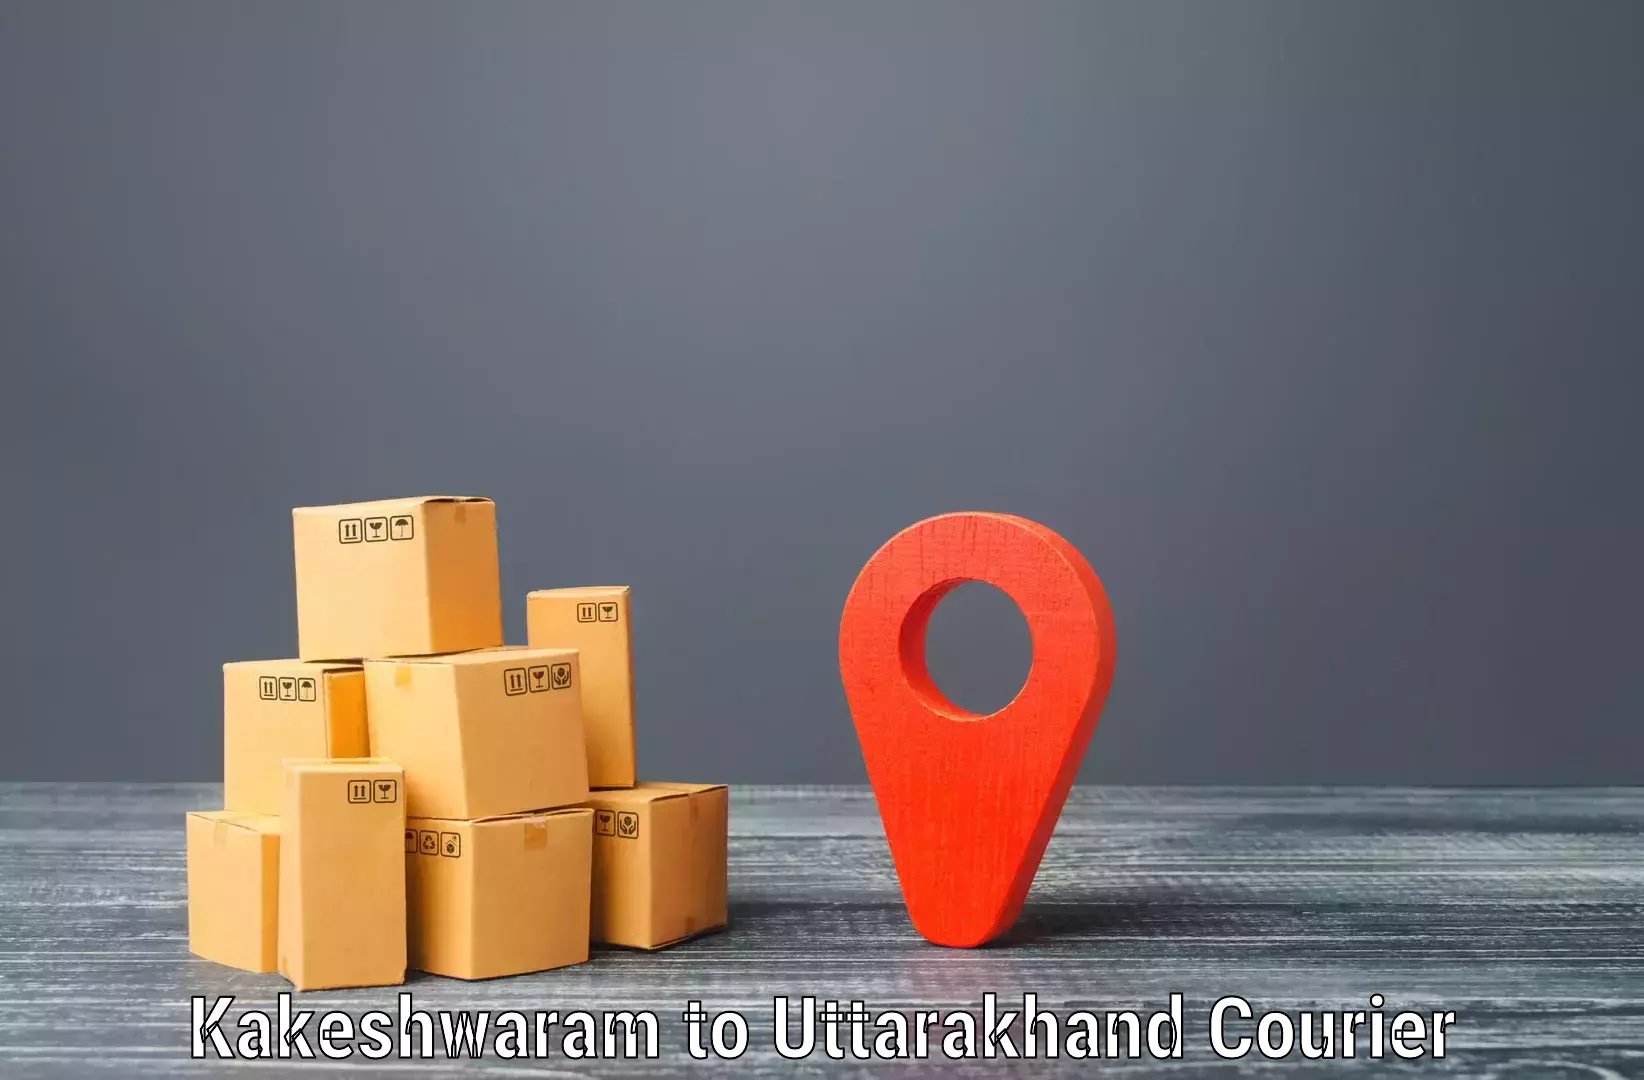 Easy access courier services Kakeshwaram to Rishikesh